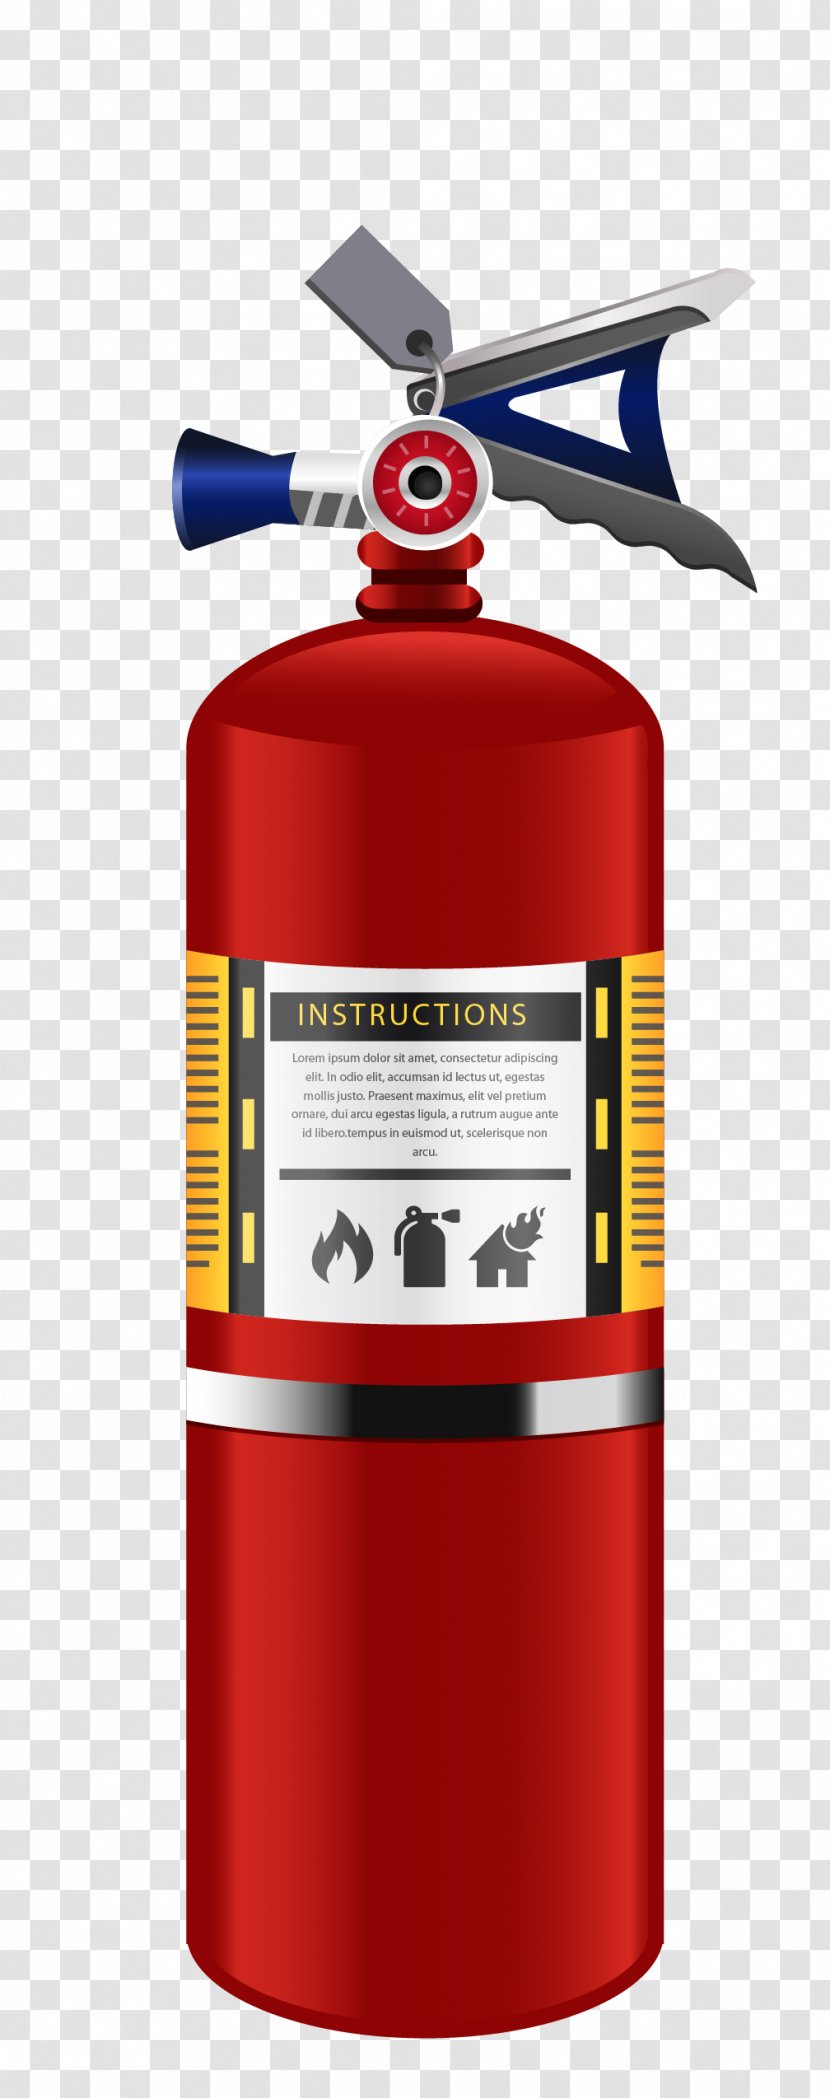 Fire Extinguisher Firefighting Foam - Cylinder - Textured Material Vector Red Transparent PNG